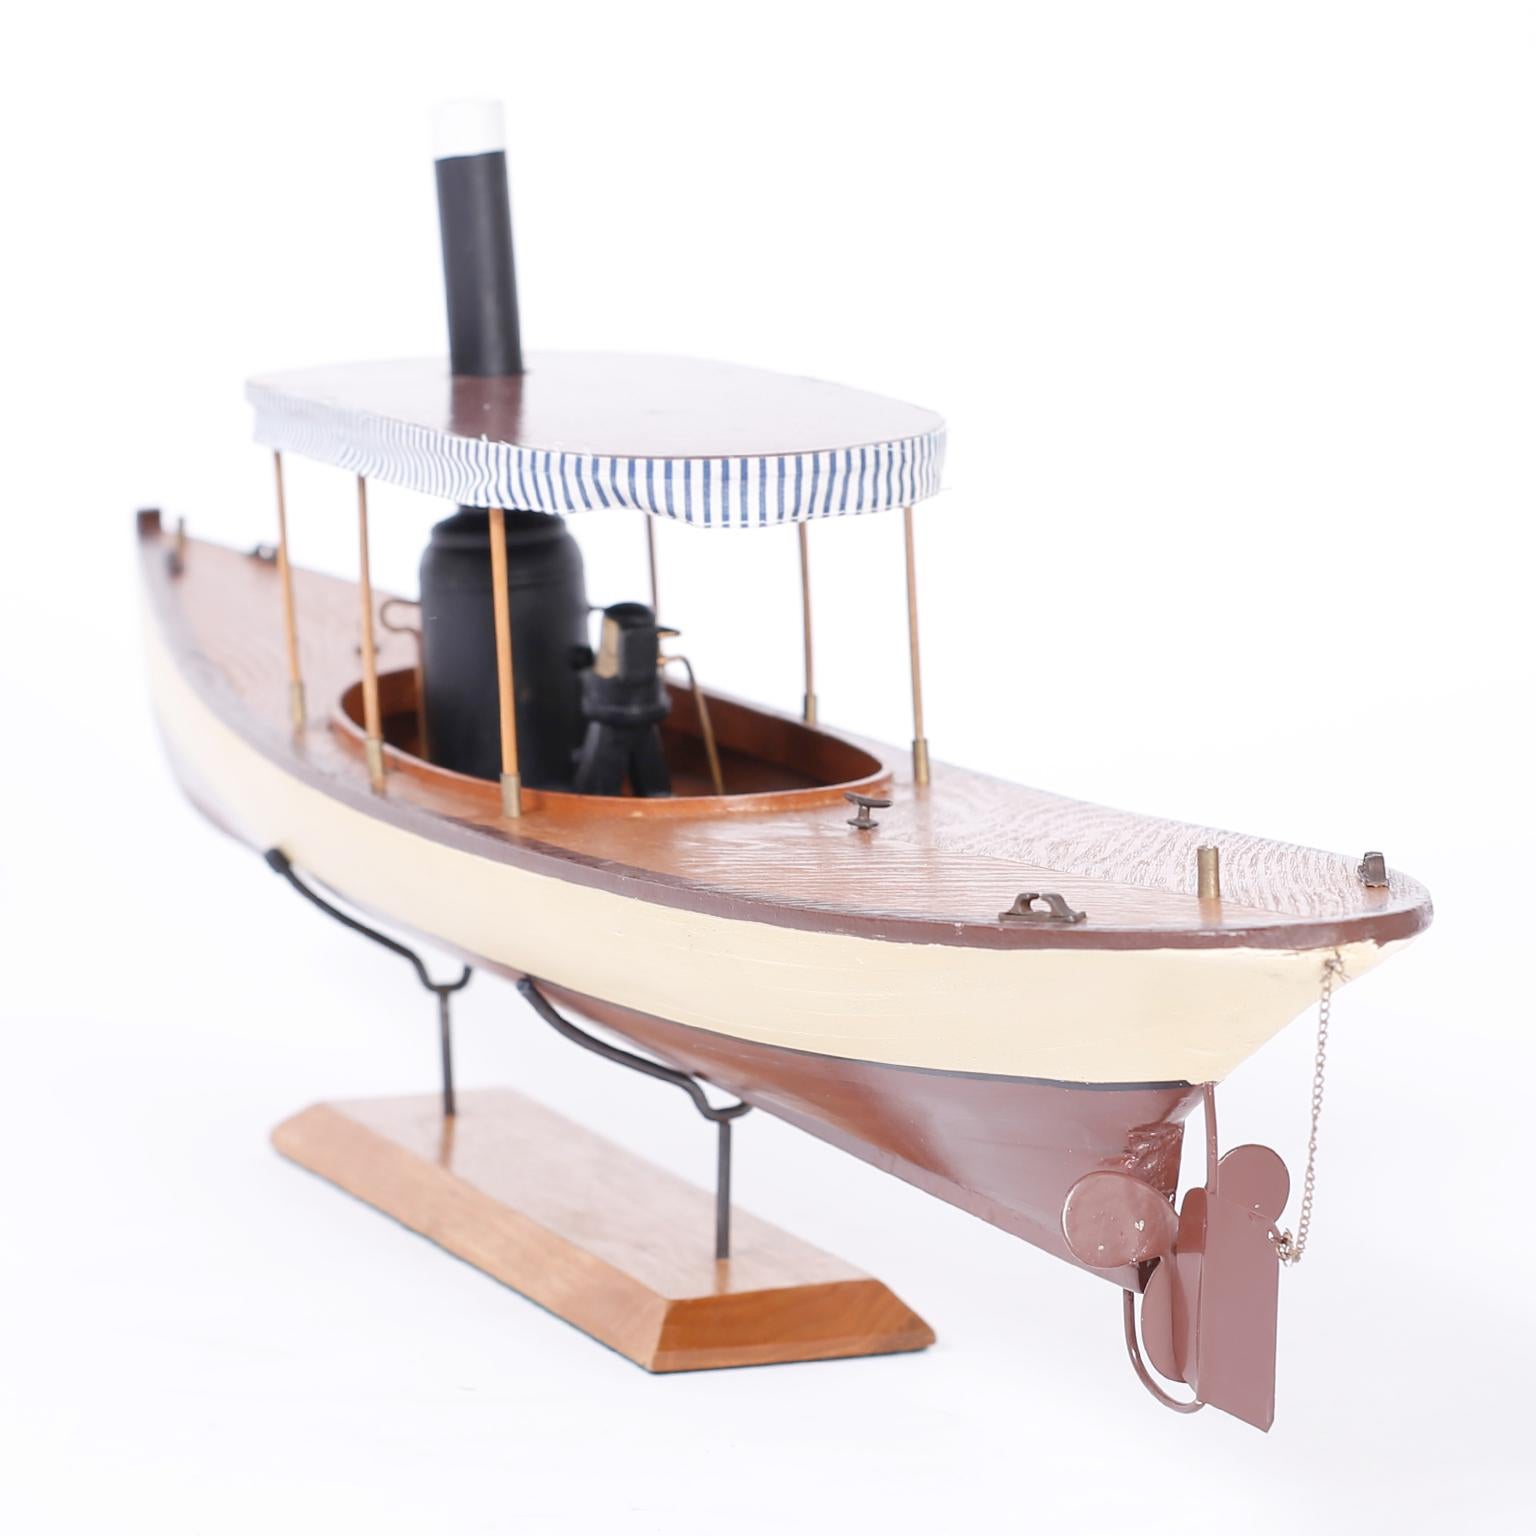 20th Century Model of a Steam Powered Boat or Launch